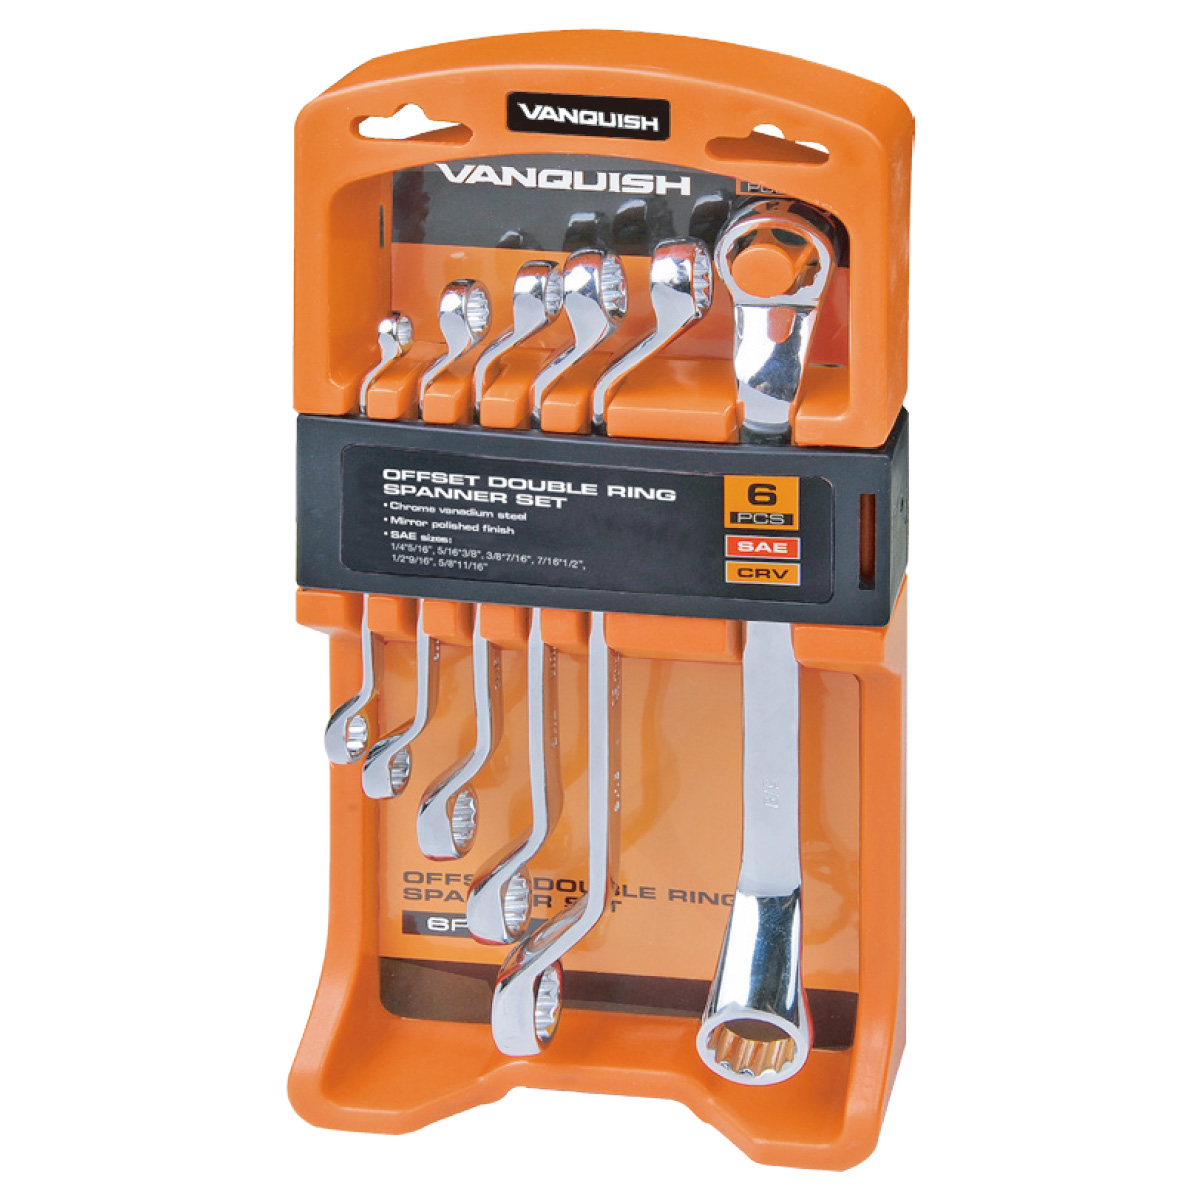 6-PIECE DOUBLE-RING OFFSET SPANNER SET